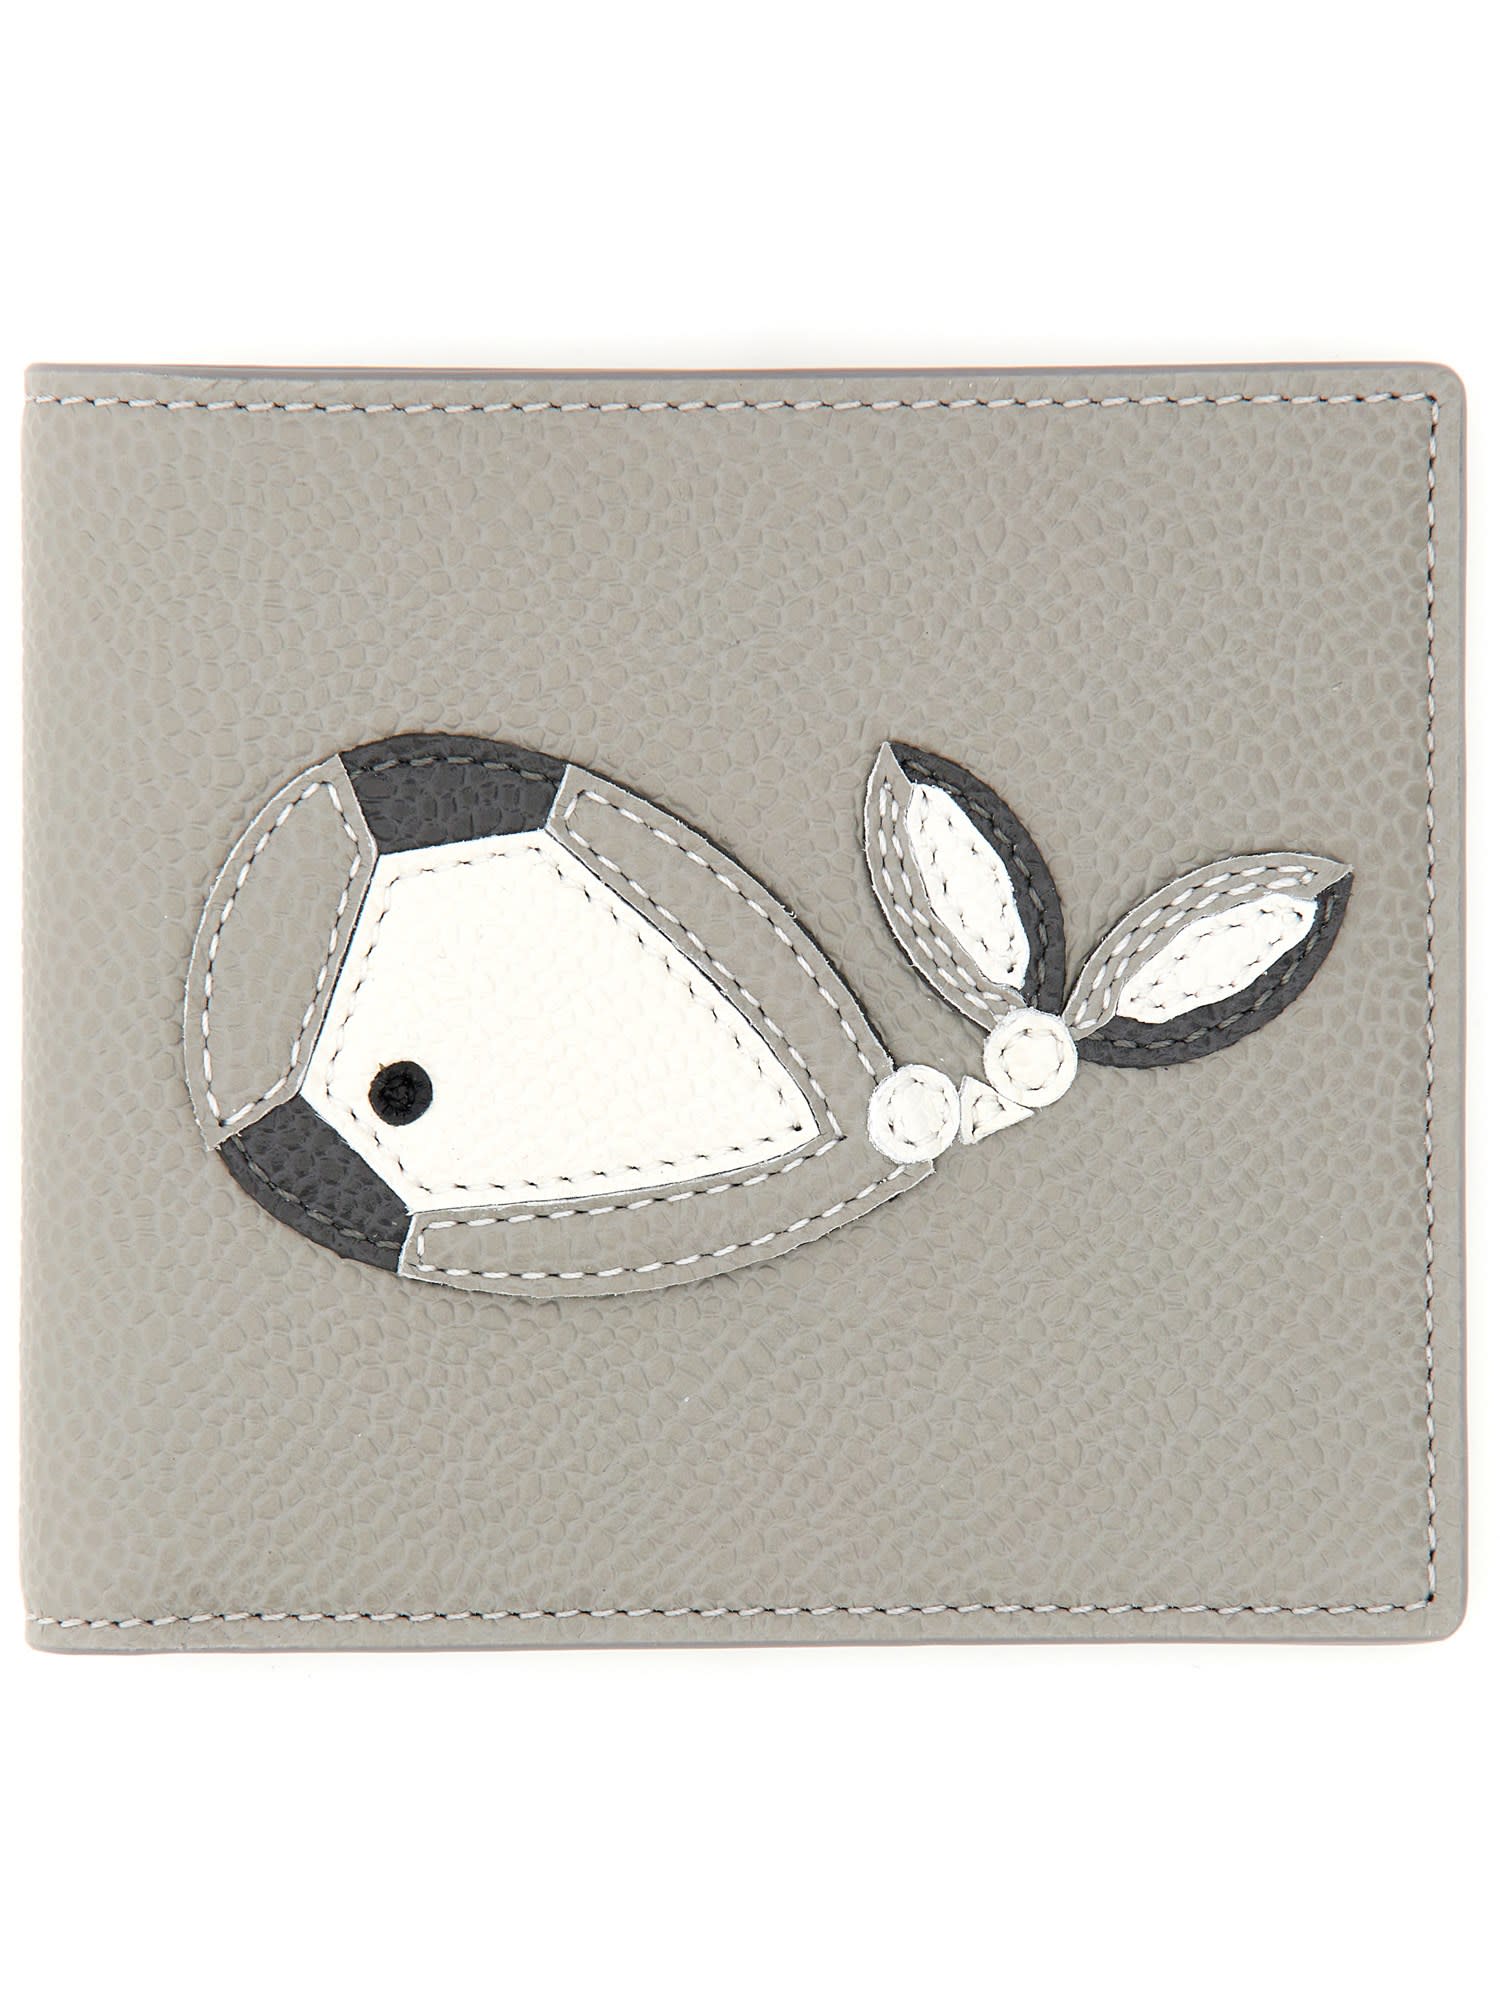 Thom Browne Wallet With Whale Application In Grigio